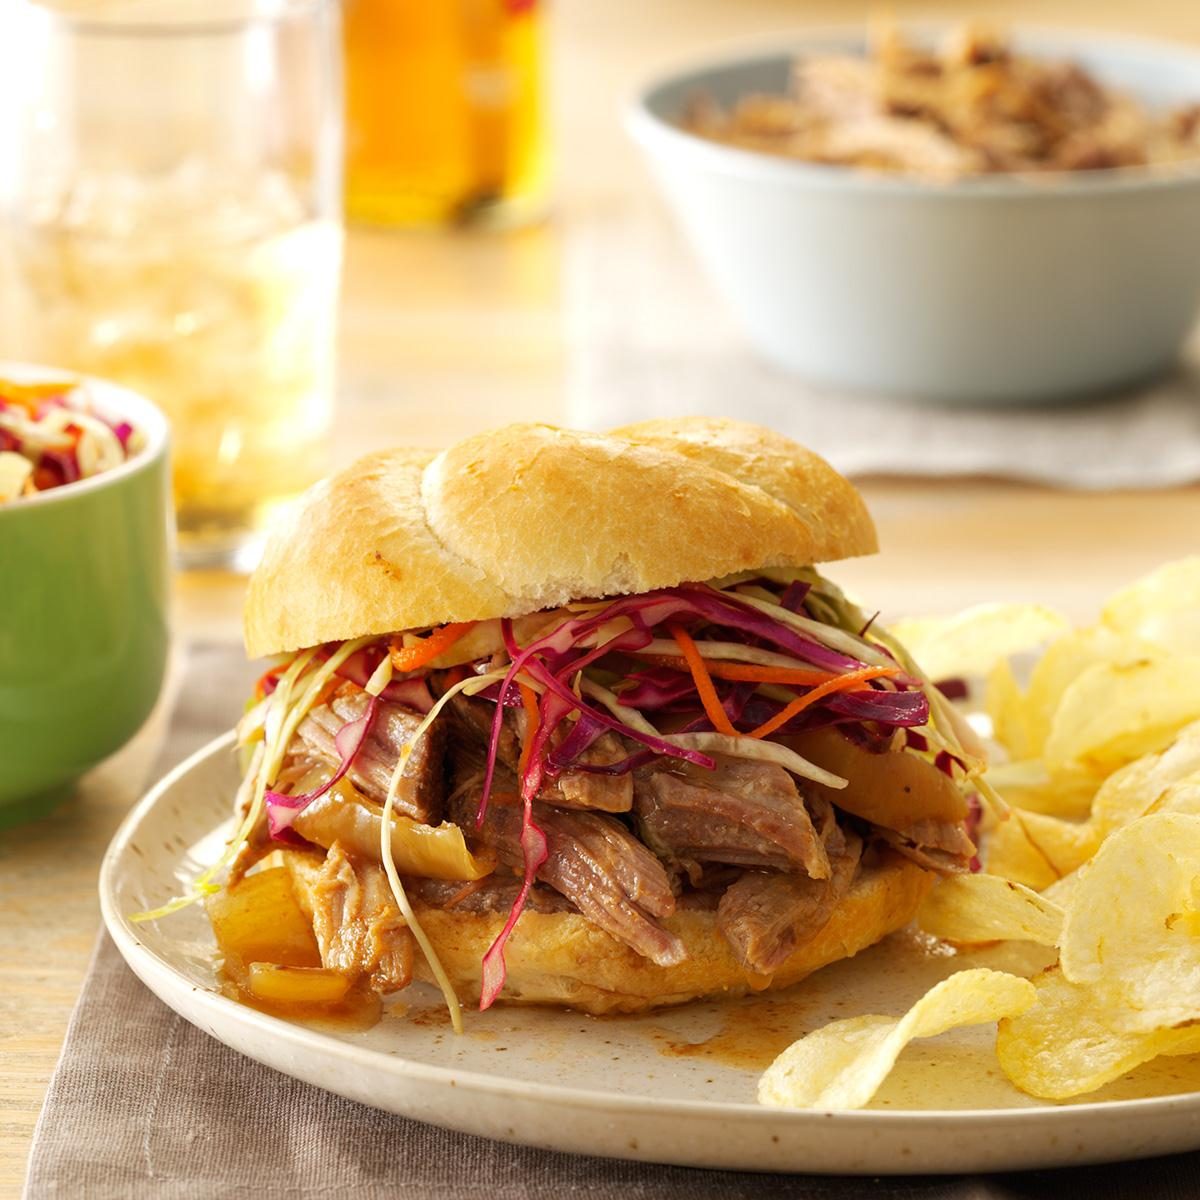 Illinois: Sweet & Spicy Pulled Pork Sandwiches